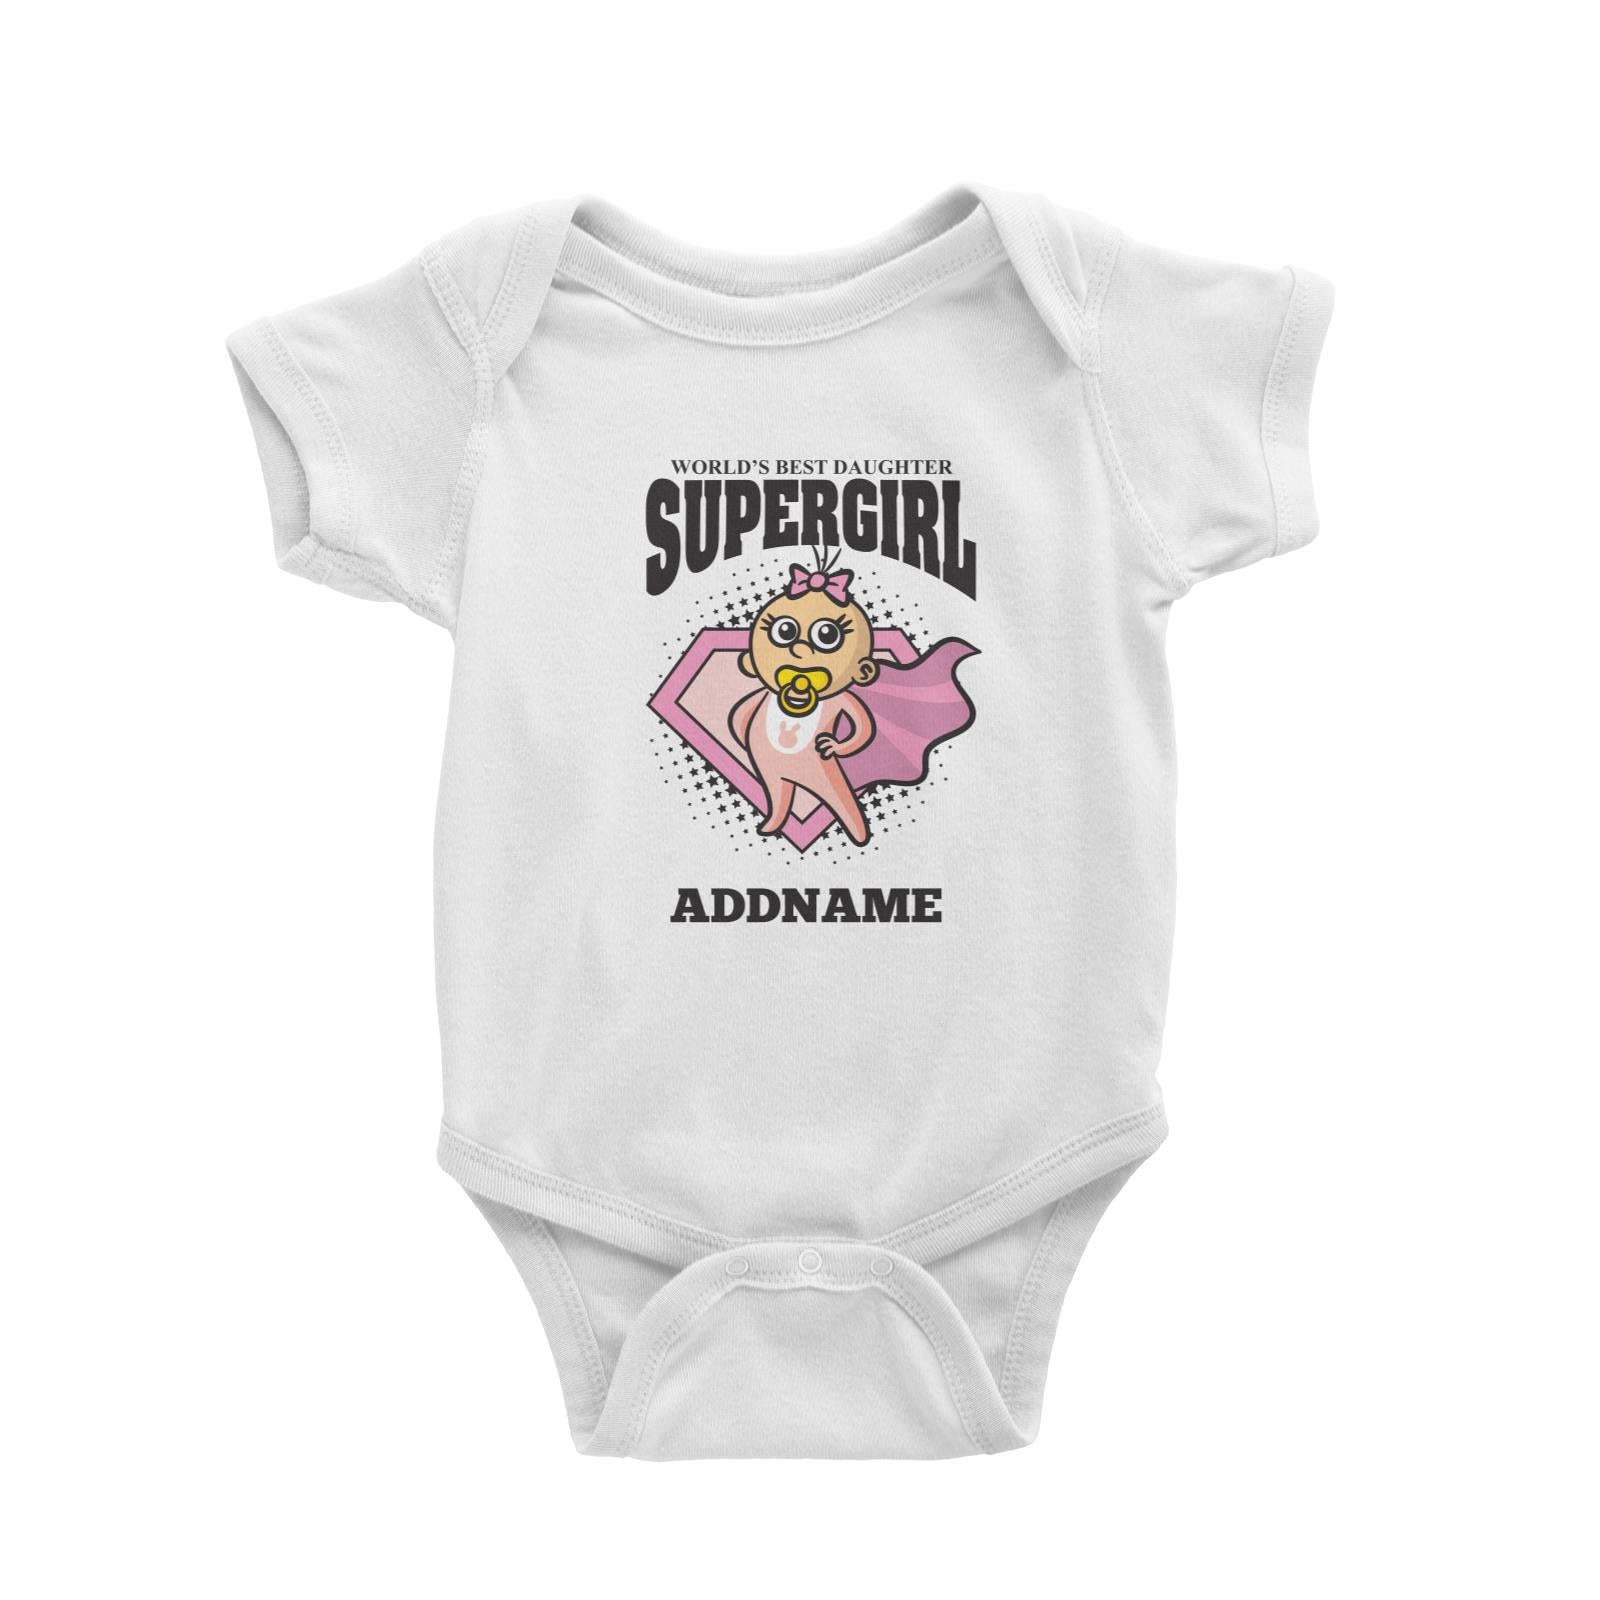 Best Daughter Supergirl Baby (FLASH DEAL) Baby Romper Personalizable Designs Matching Family Superhero Family Edition Superhero